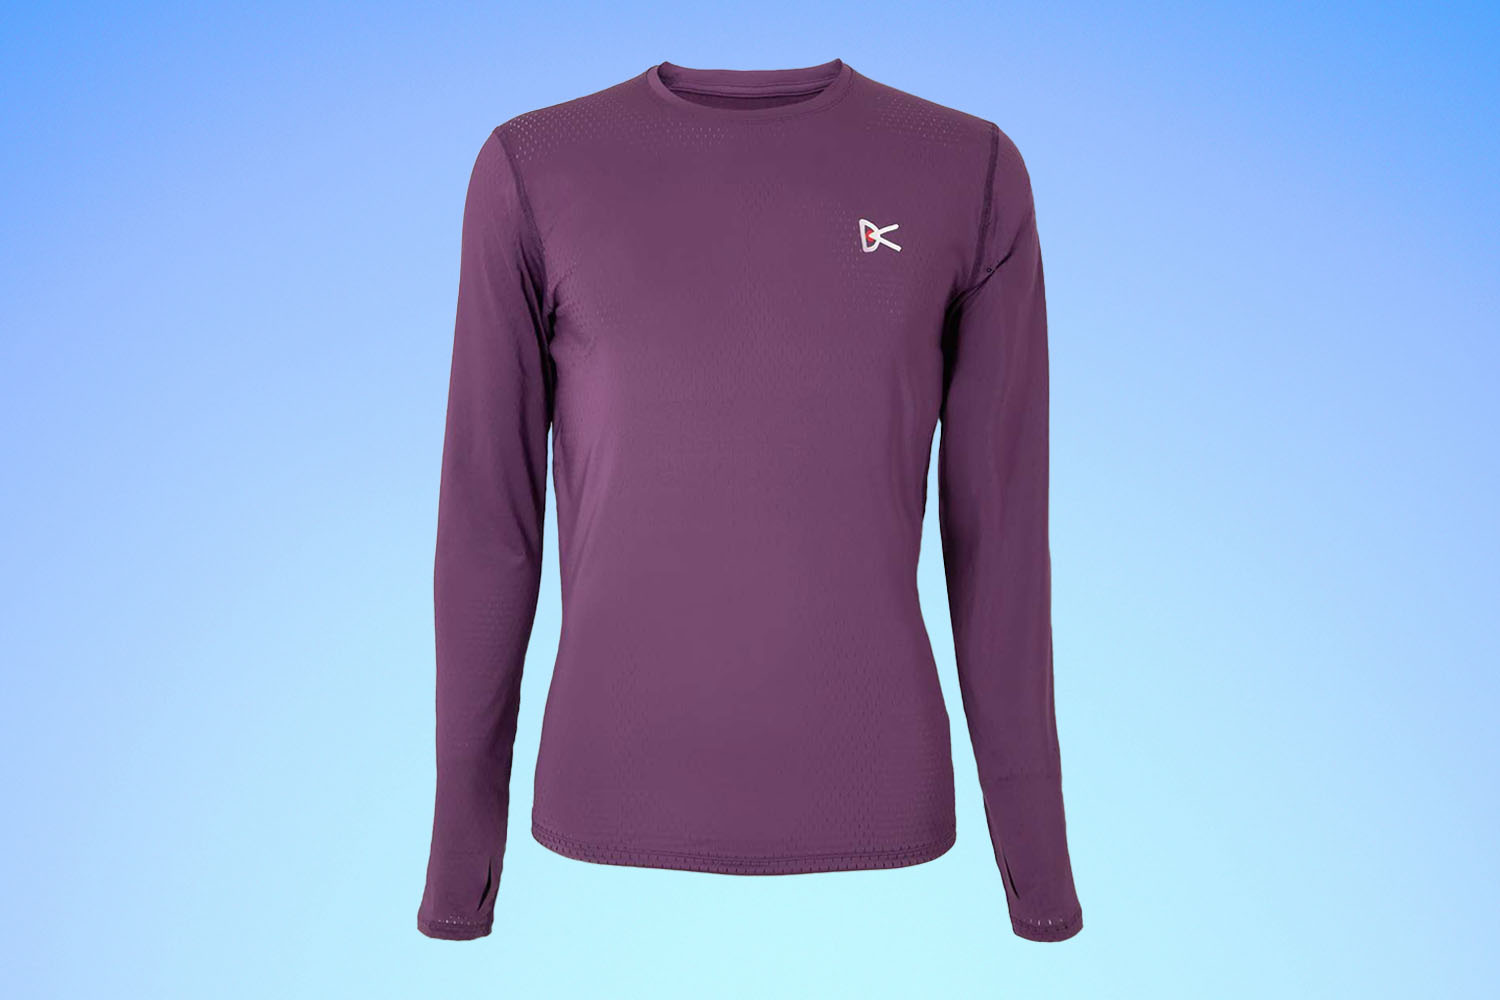 a purple long sleeve shirt from District Vision on a blue gradient background